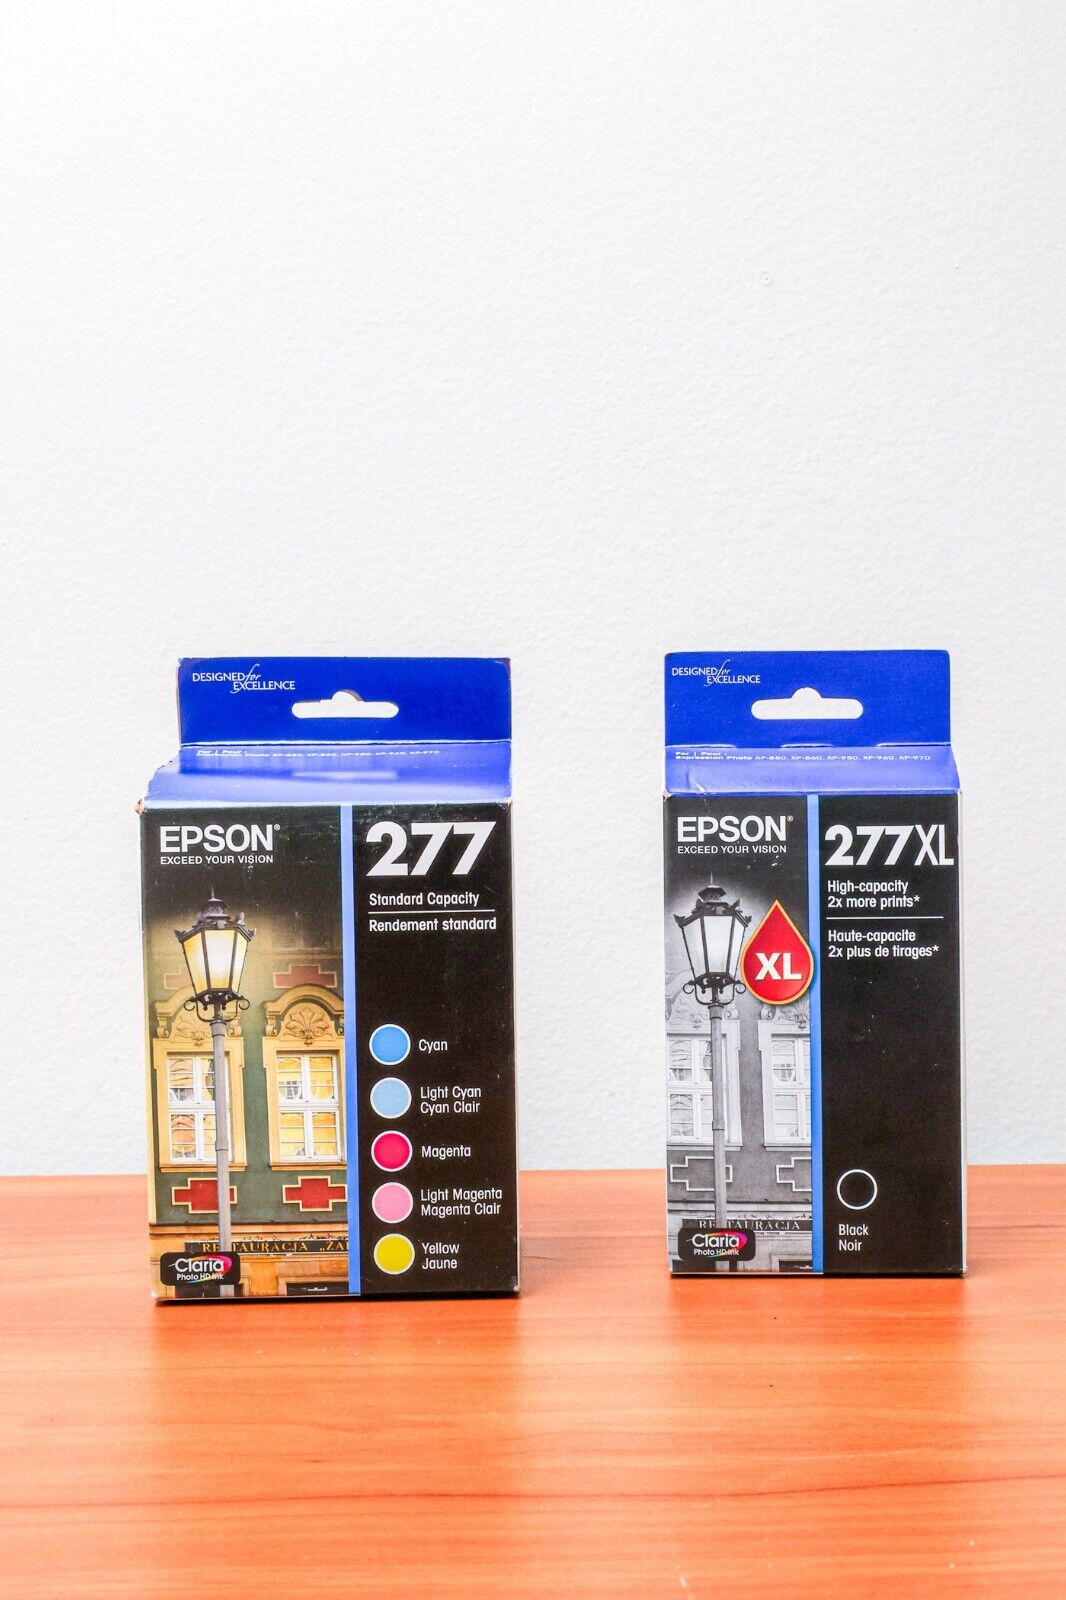 Geniune Epson Lot of 6 Ink Cartridges 277XL and 277 Standard Capacity